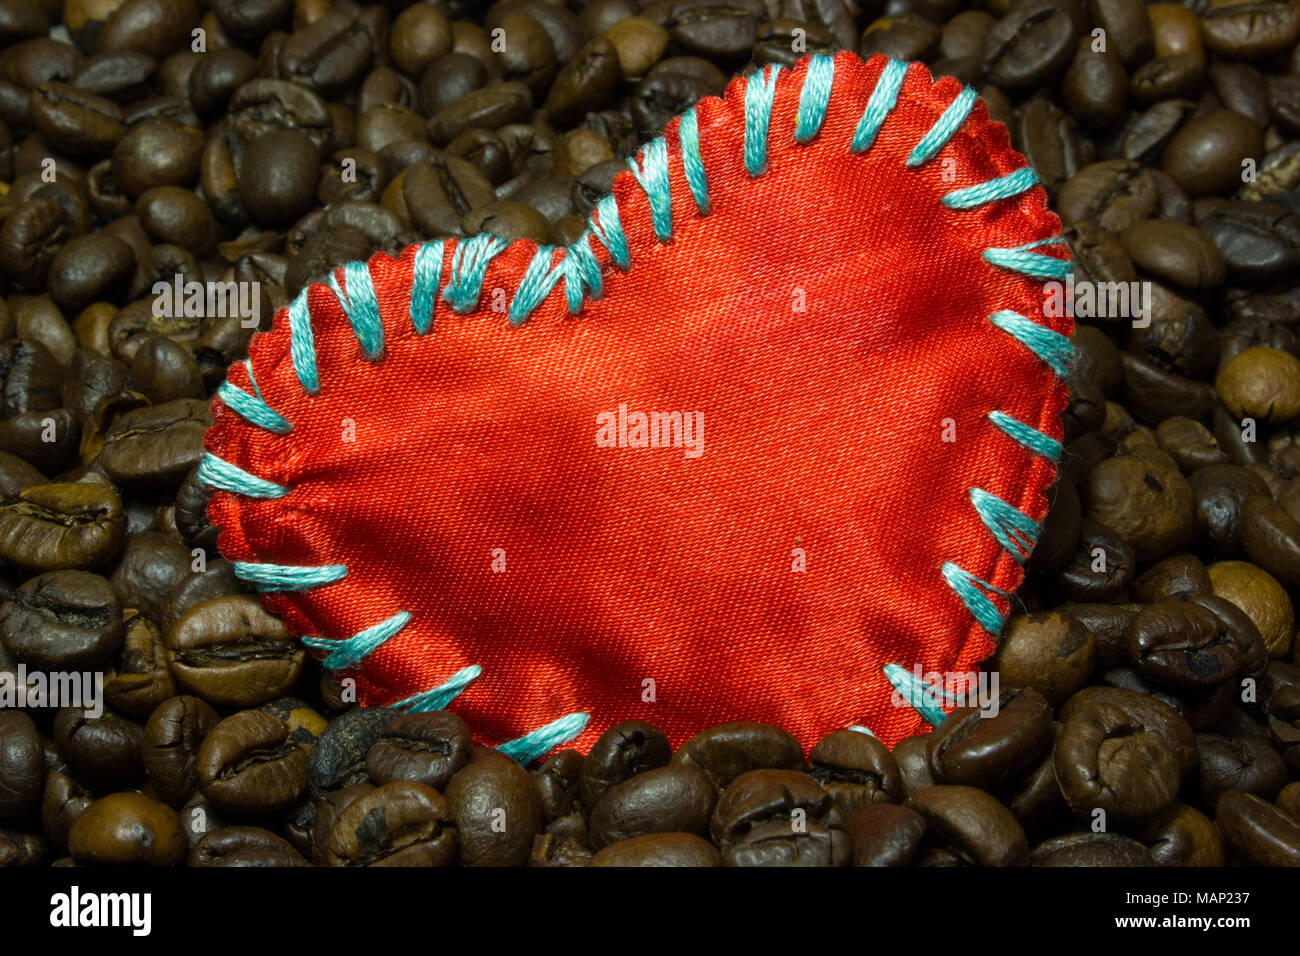 coffee-beans-and-a-red-love-heart-as-background-stock-photo-alamy